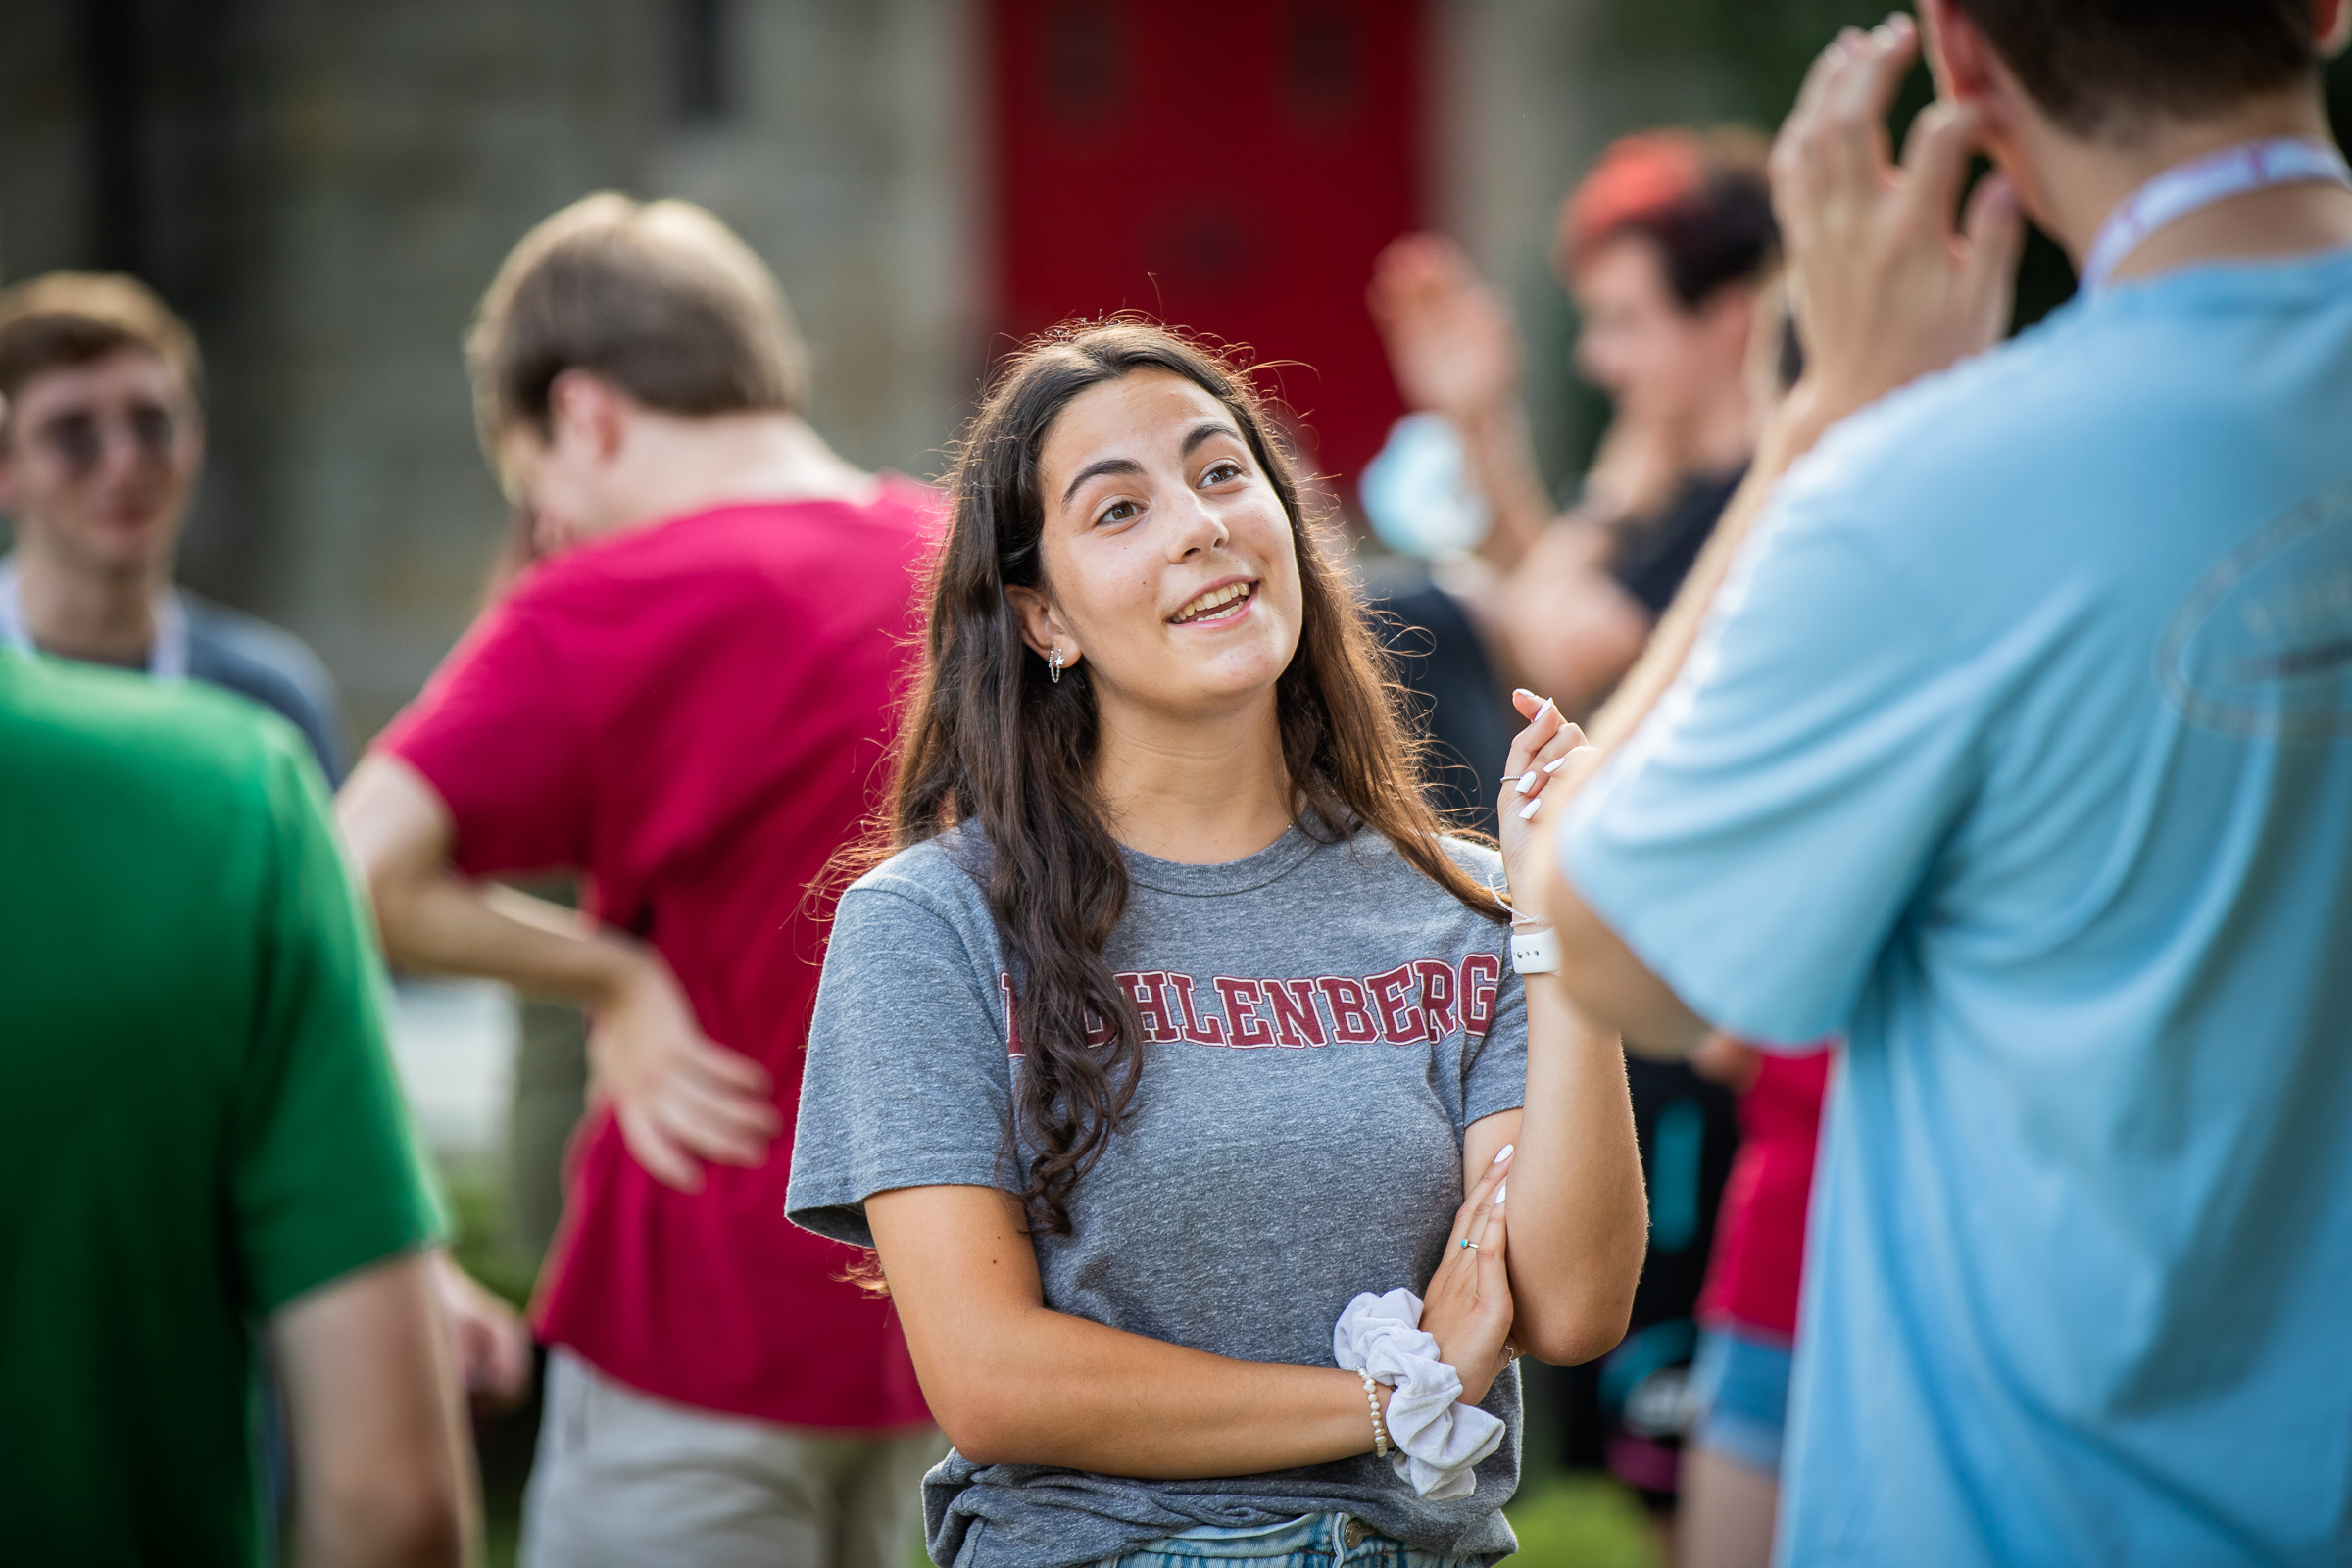 Students participate in orientation events as they are welcomed to campus in their first year.